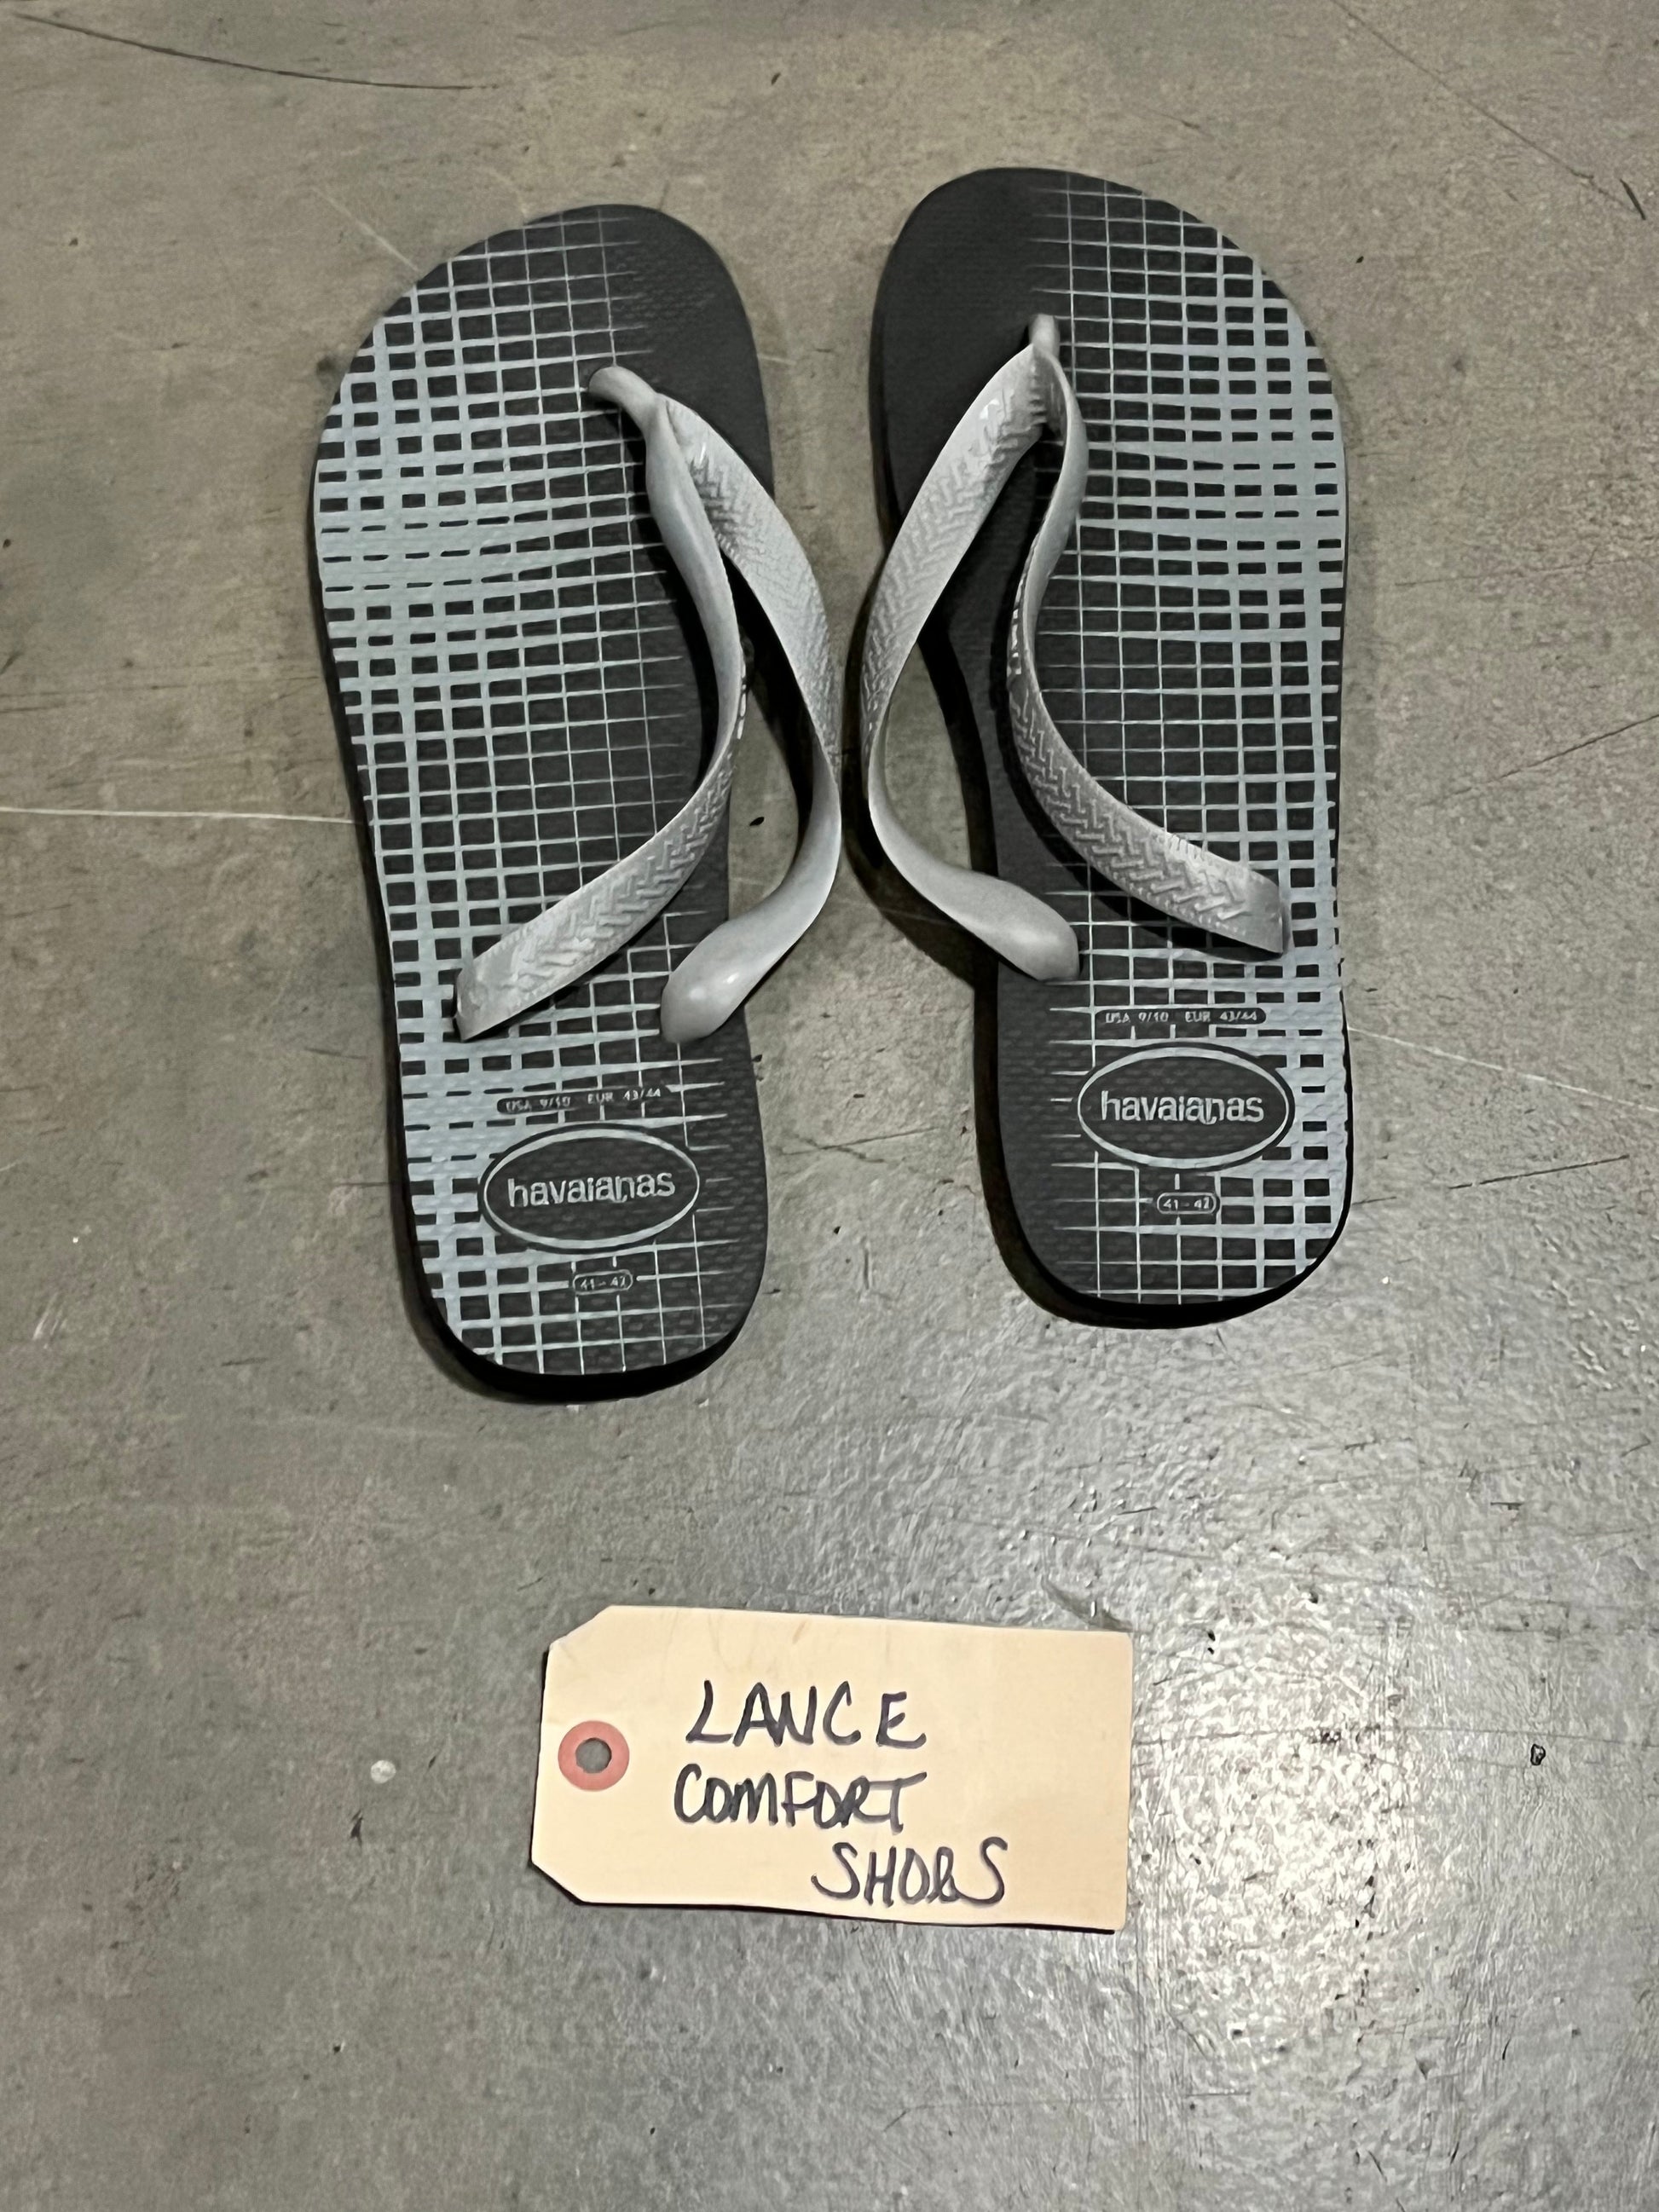 BALLERS: Lance's Comfort Shoes 10 (unless Spencer was stepping on them)